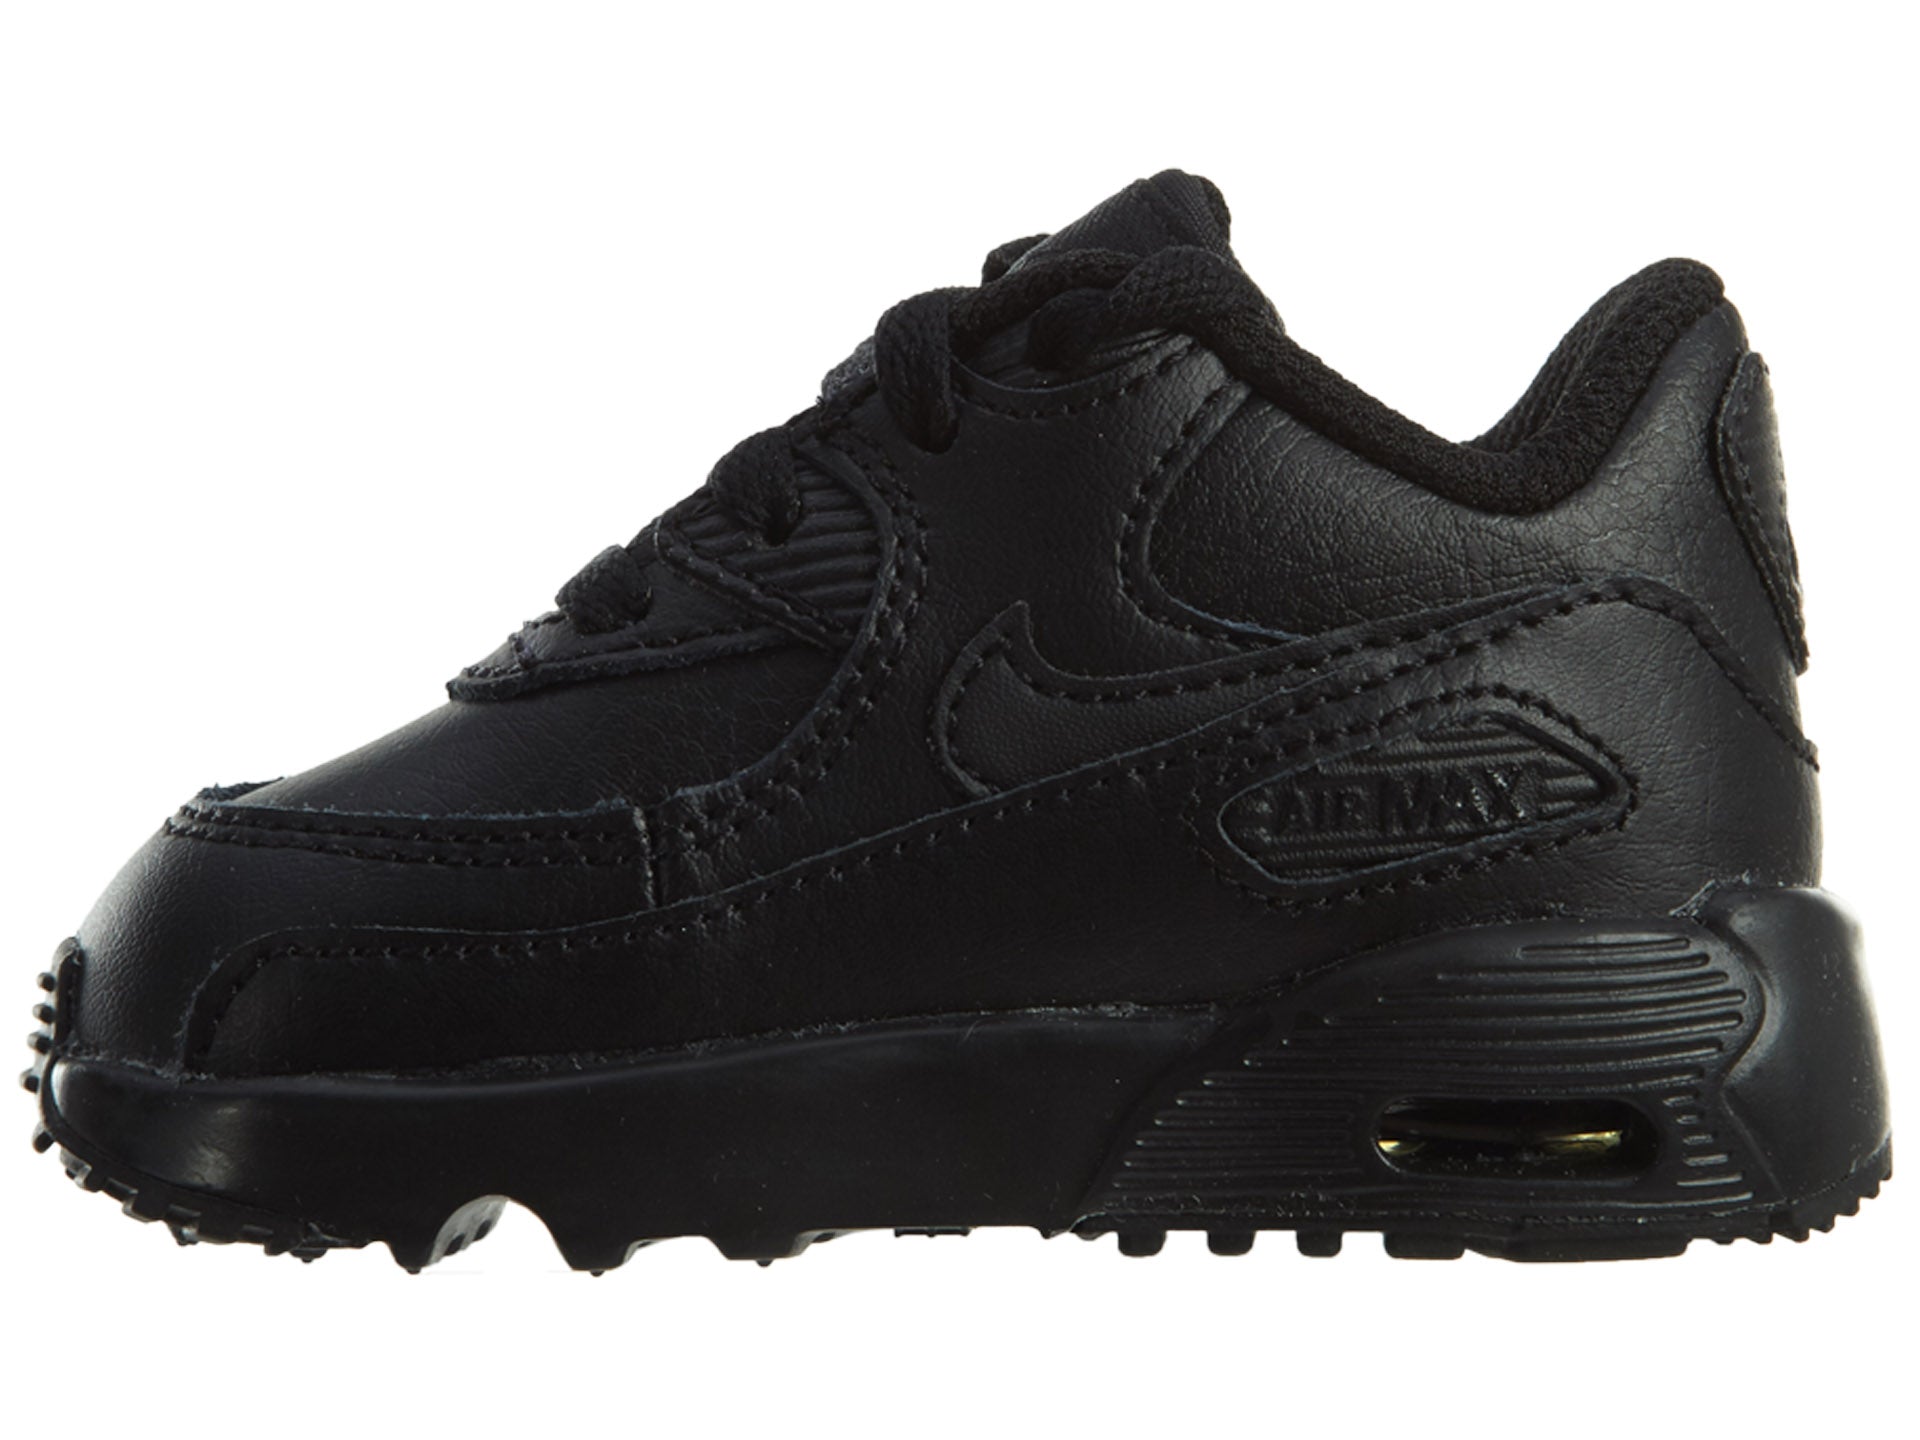 Nike Air Max 90 All Black Shoes Boys / Girls Style :833416